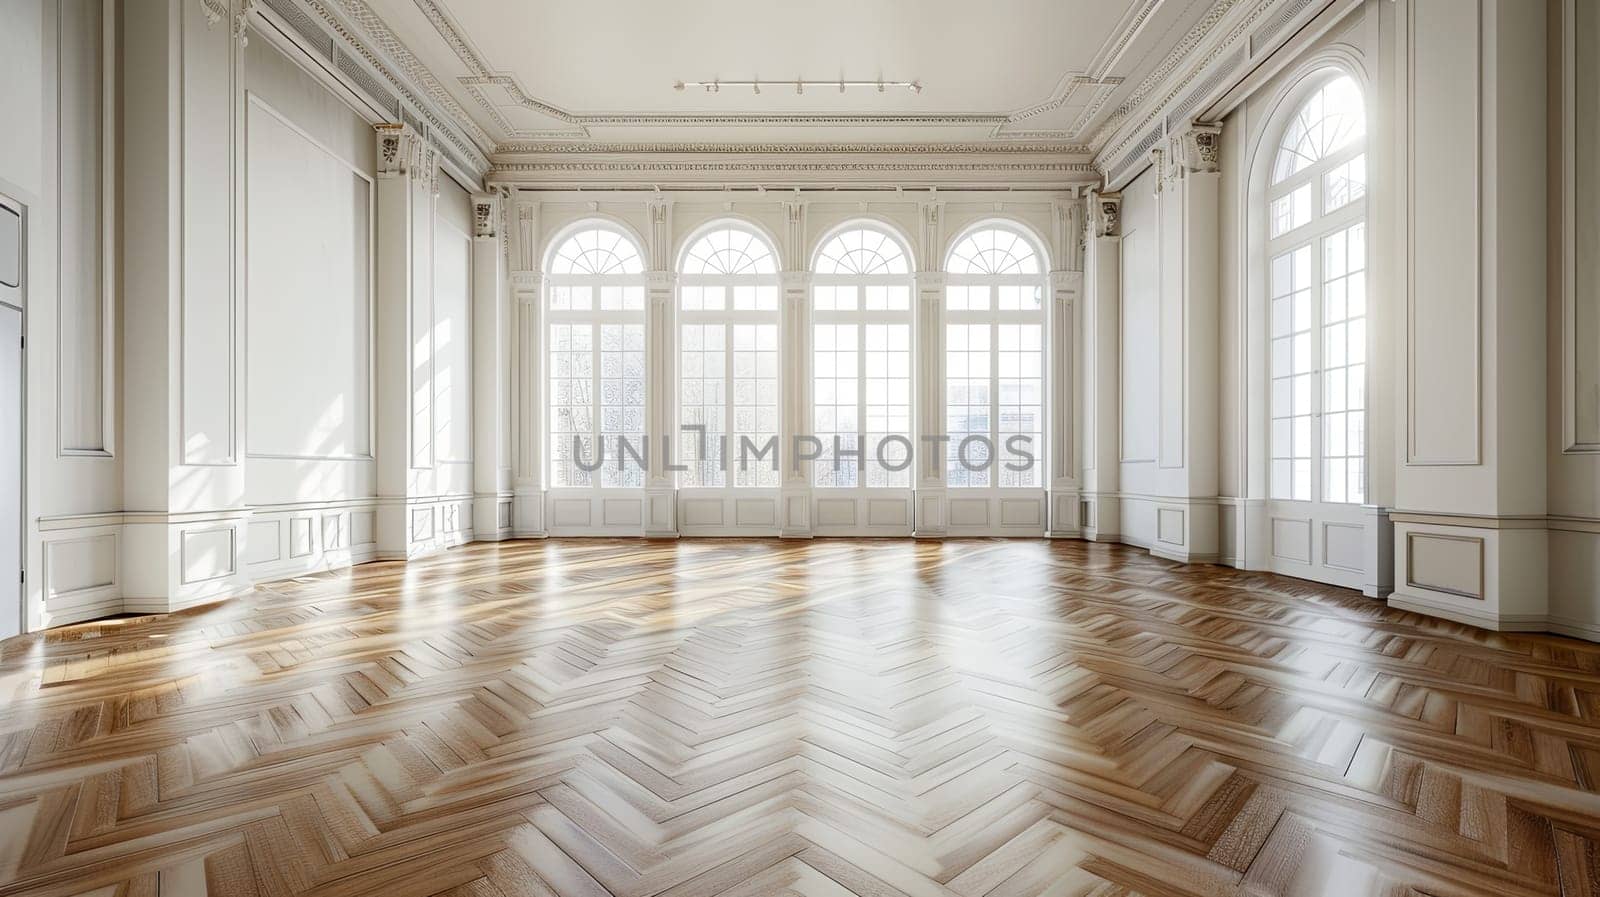 A big empty banquet hall with parquet flooring and vintage-style decor, featuring a multitude of large windows.